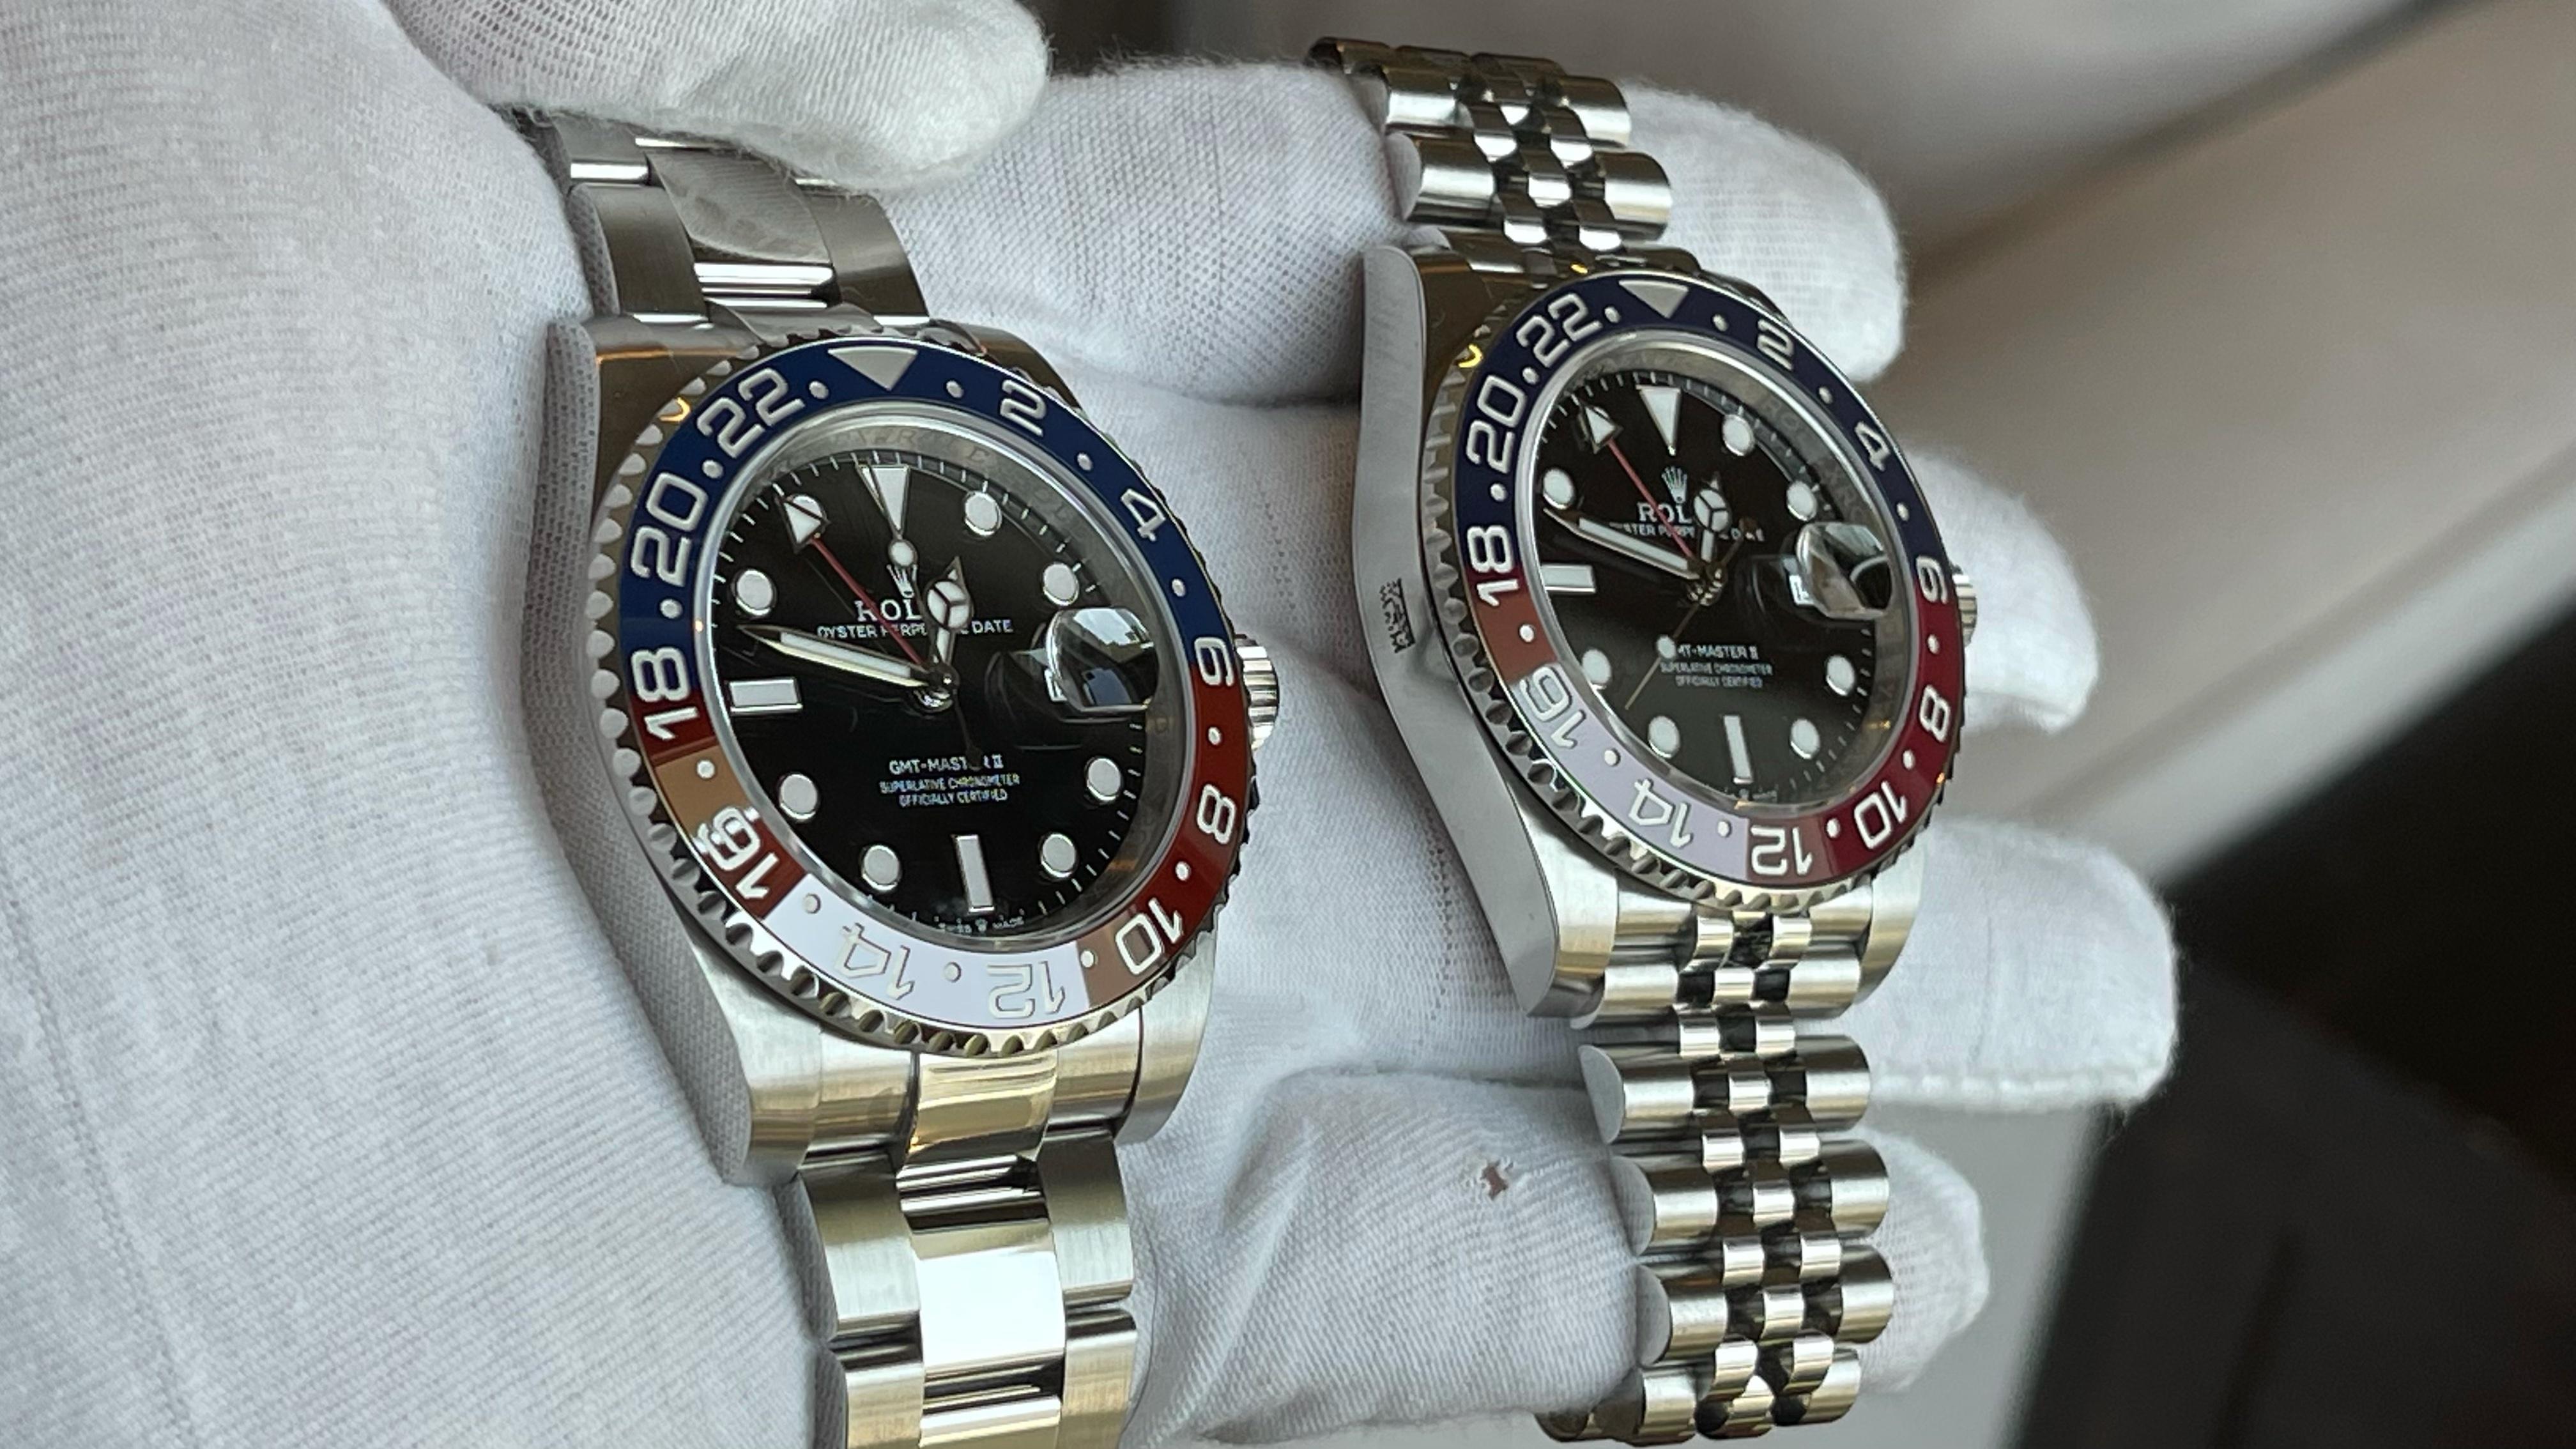 New Clean Factory Rolex GMT II Master - Page 4 - Rolex - RWG: Replica ...